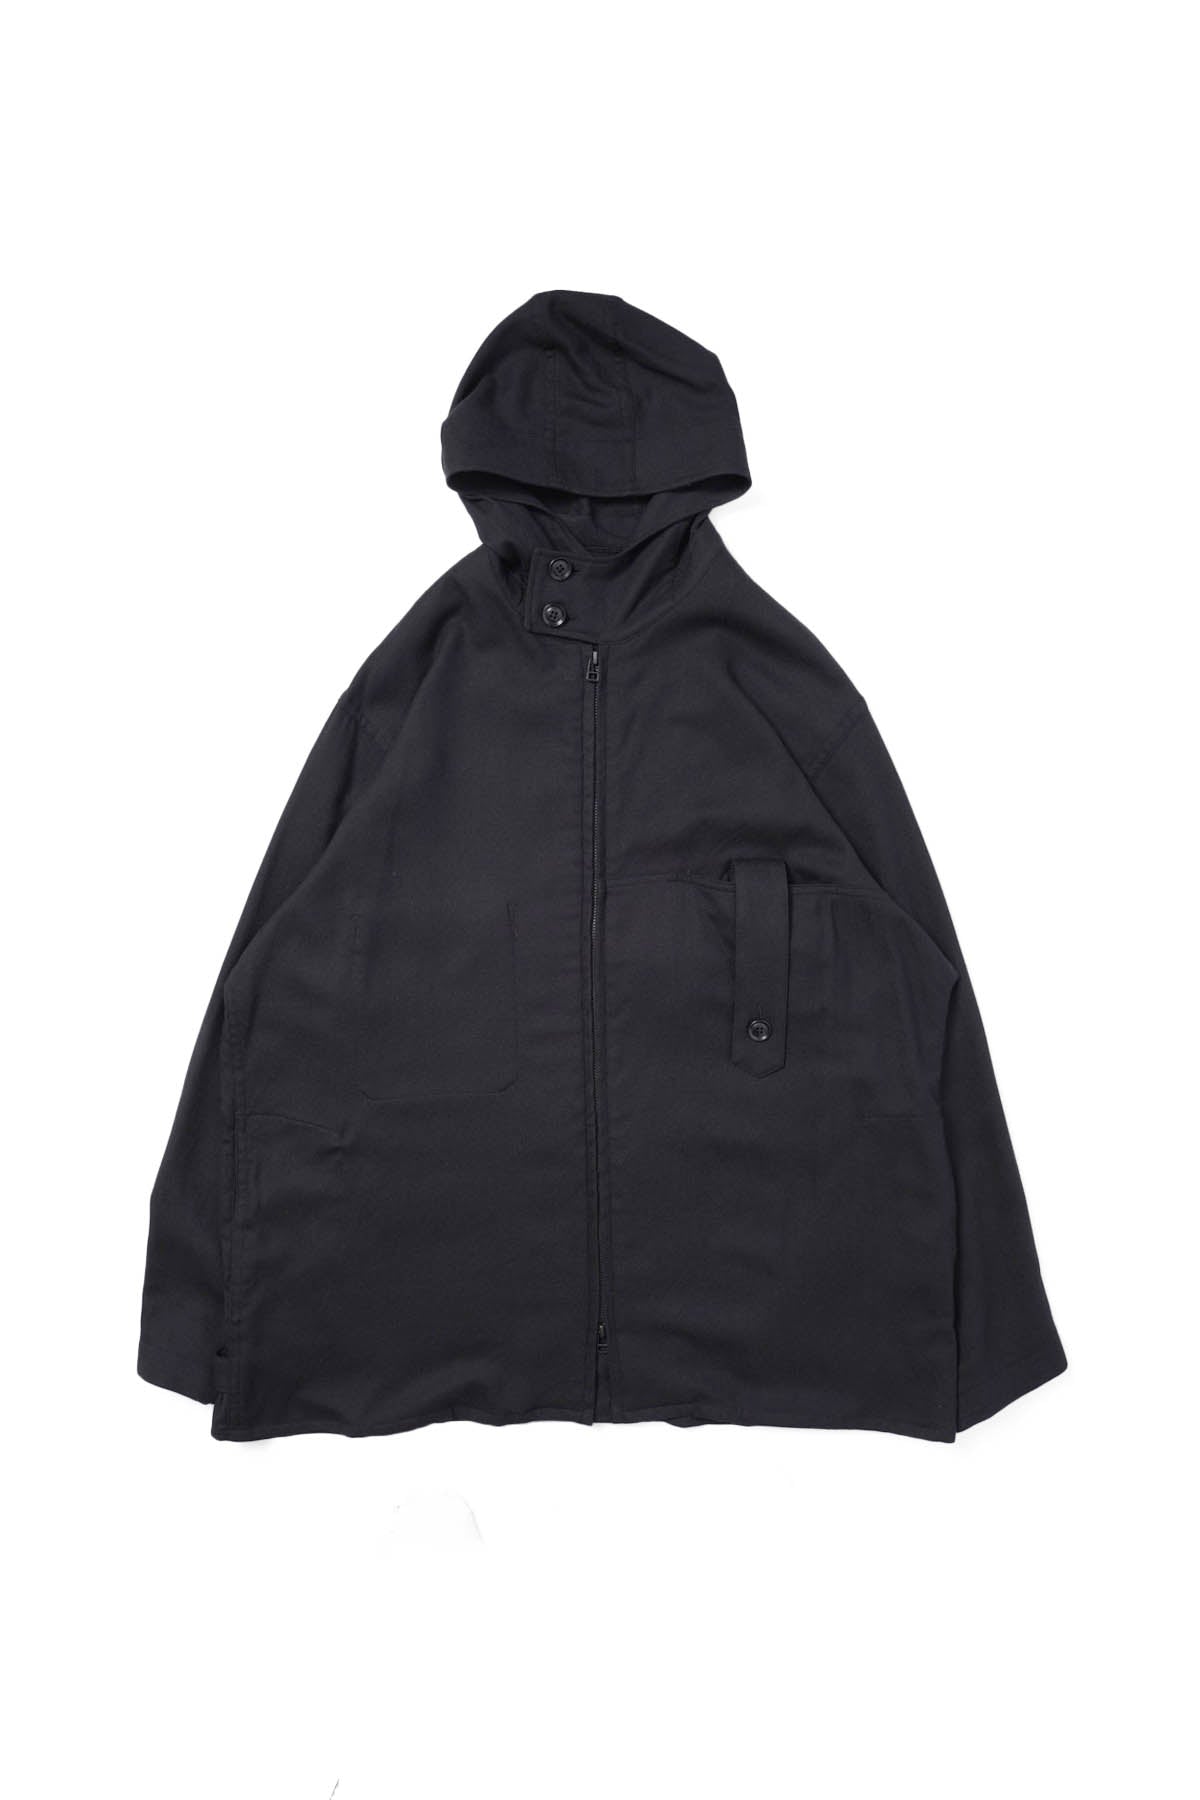 Y's BANG ON! / HOODED SHIRTS